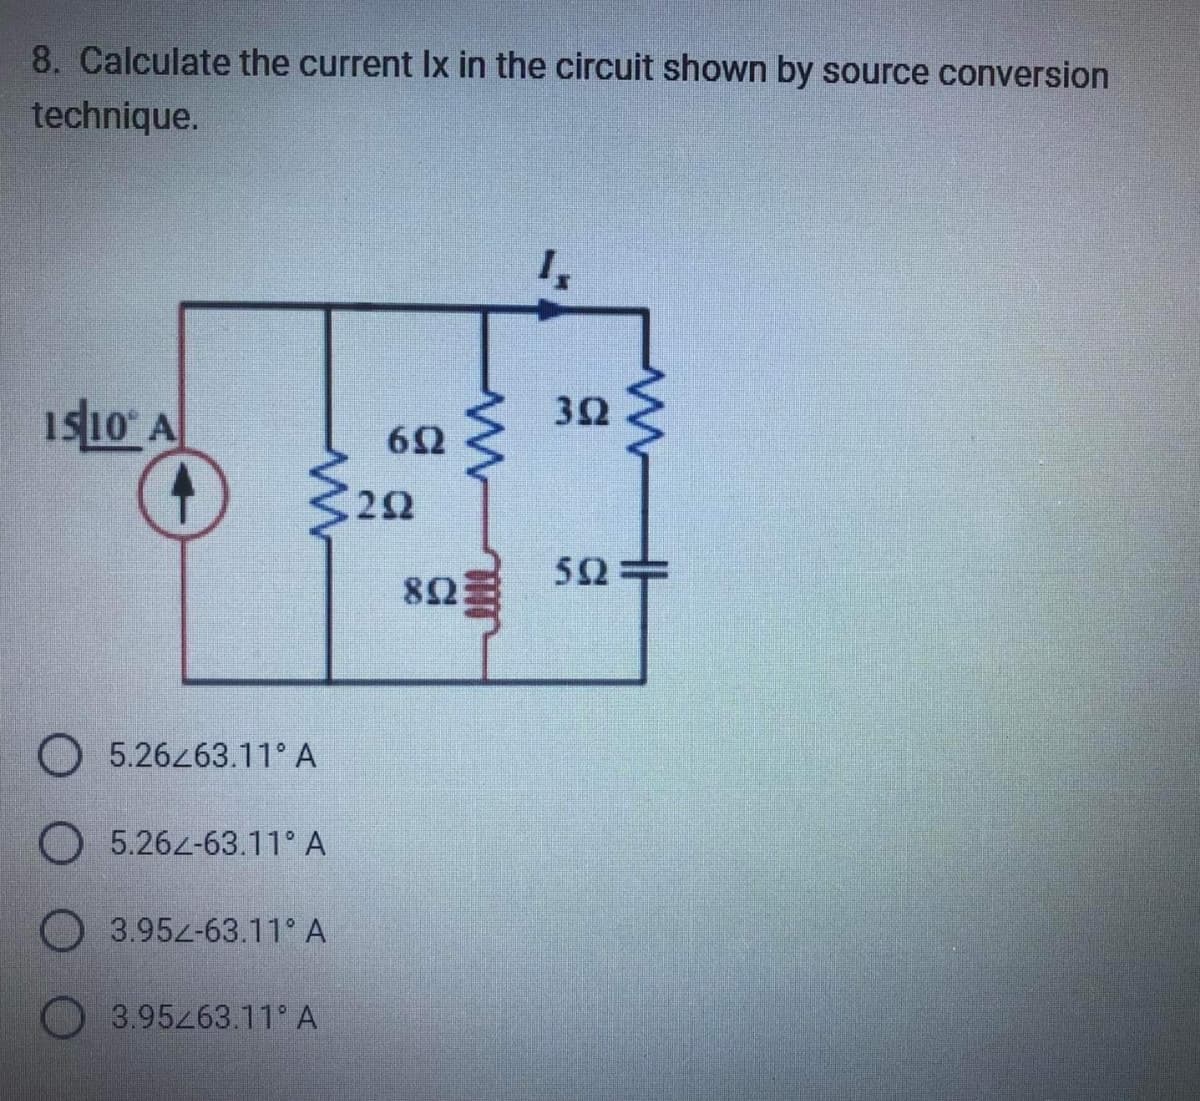 8. Calculate the current Ix in the circuit shown by source conversion
technique.
1510 A
0 ≤
O 5.26263.11° A
5.262-63.11° A
3.952-63.11° A
3.95263.11 A
652
22
www
THU
8023
I,
322
www
592=